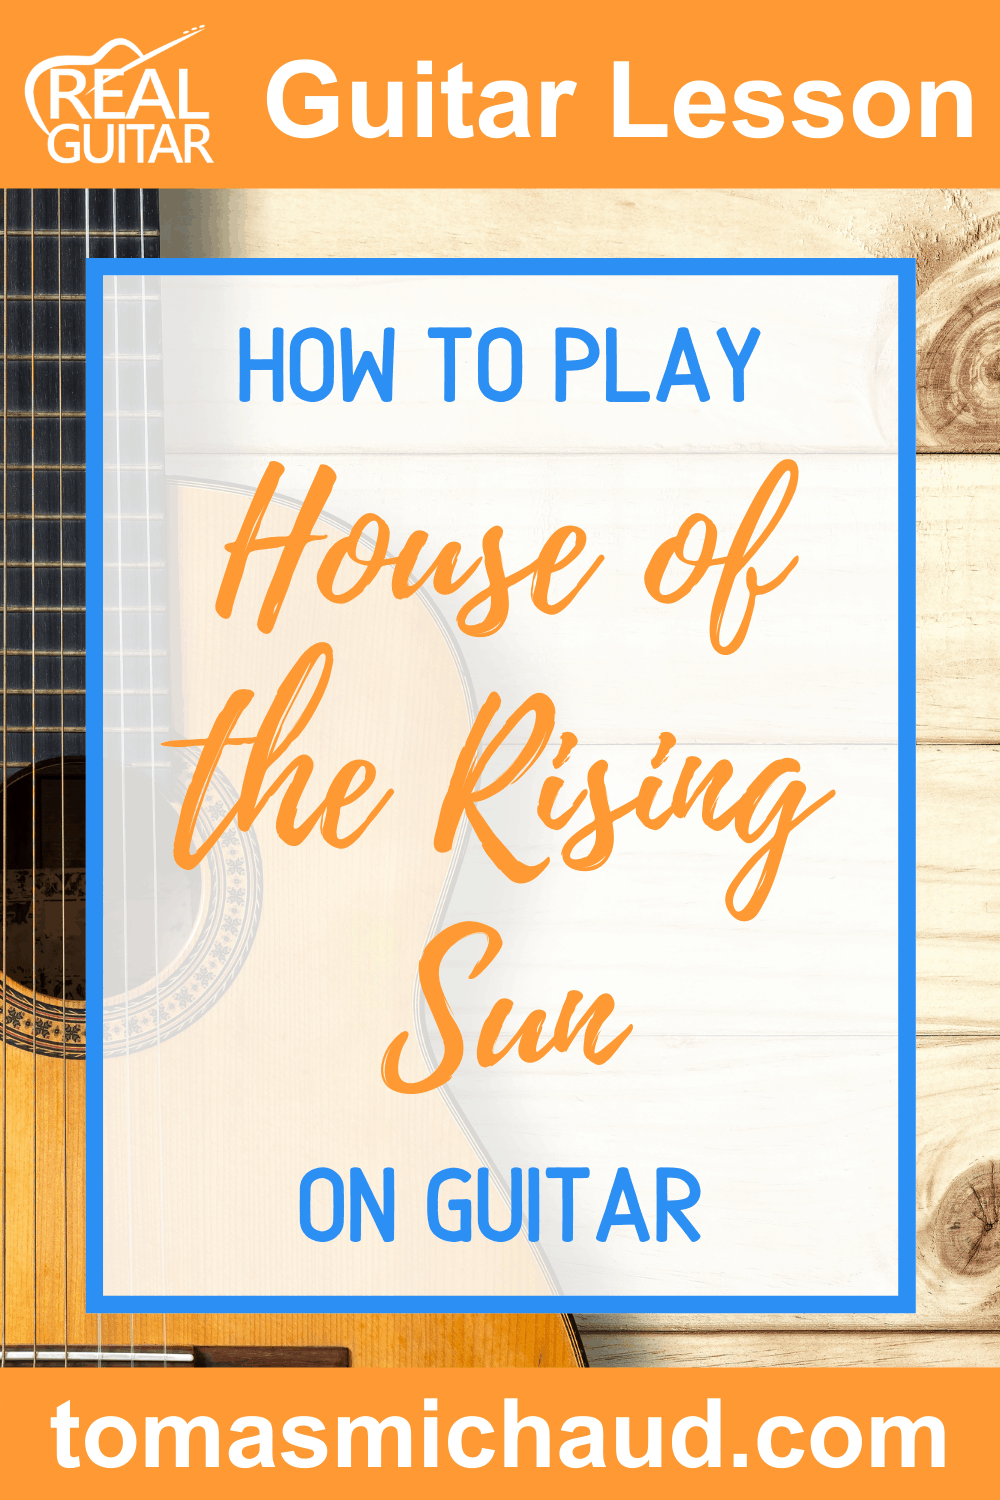 How to Play House of the Rising Sun on Guitar